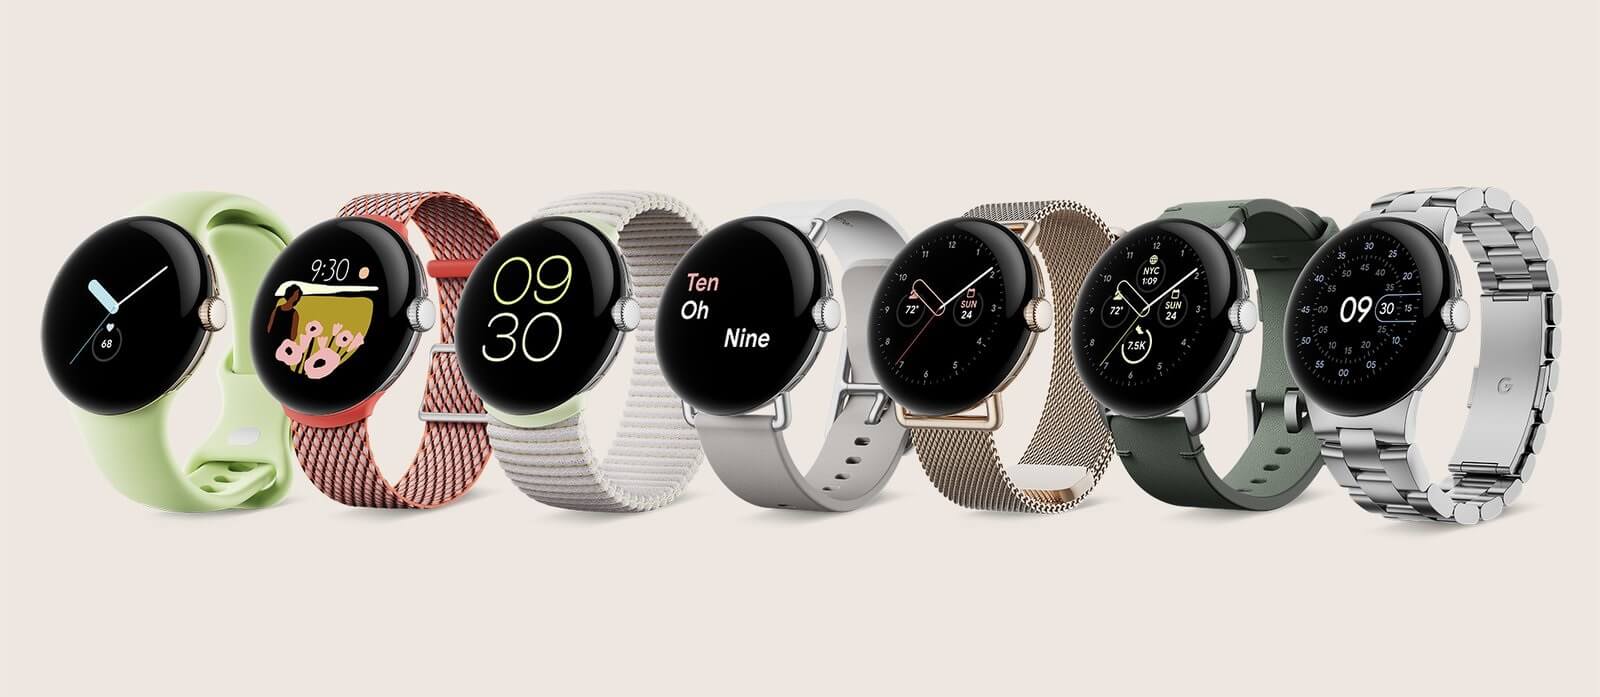 Google Pixel Watch launched Globally with AMOLED screen, Fitbit